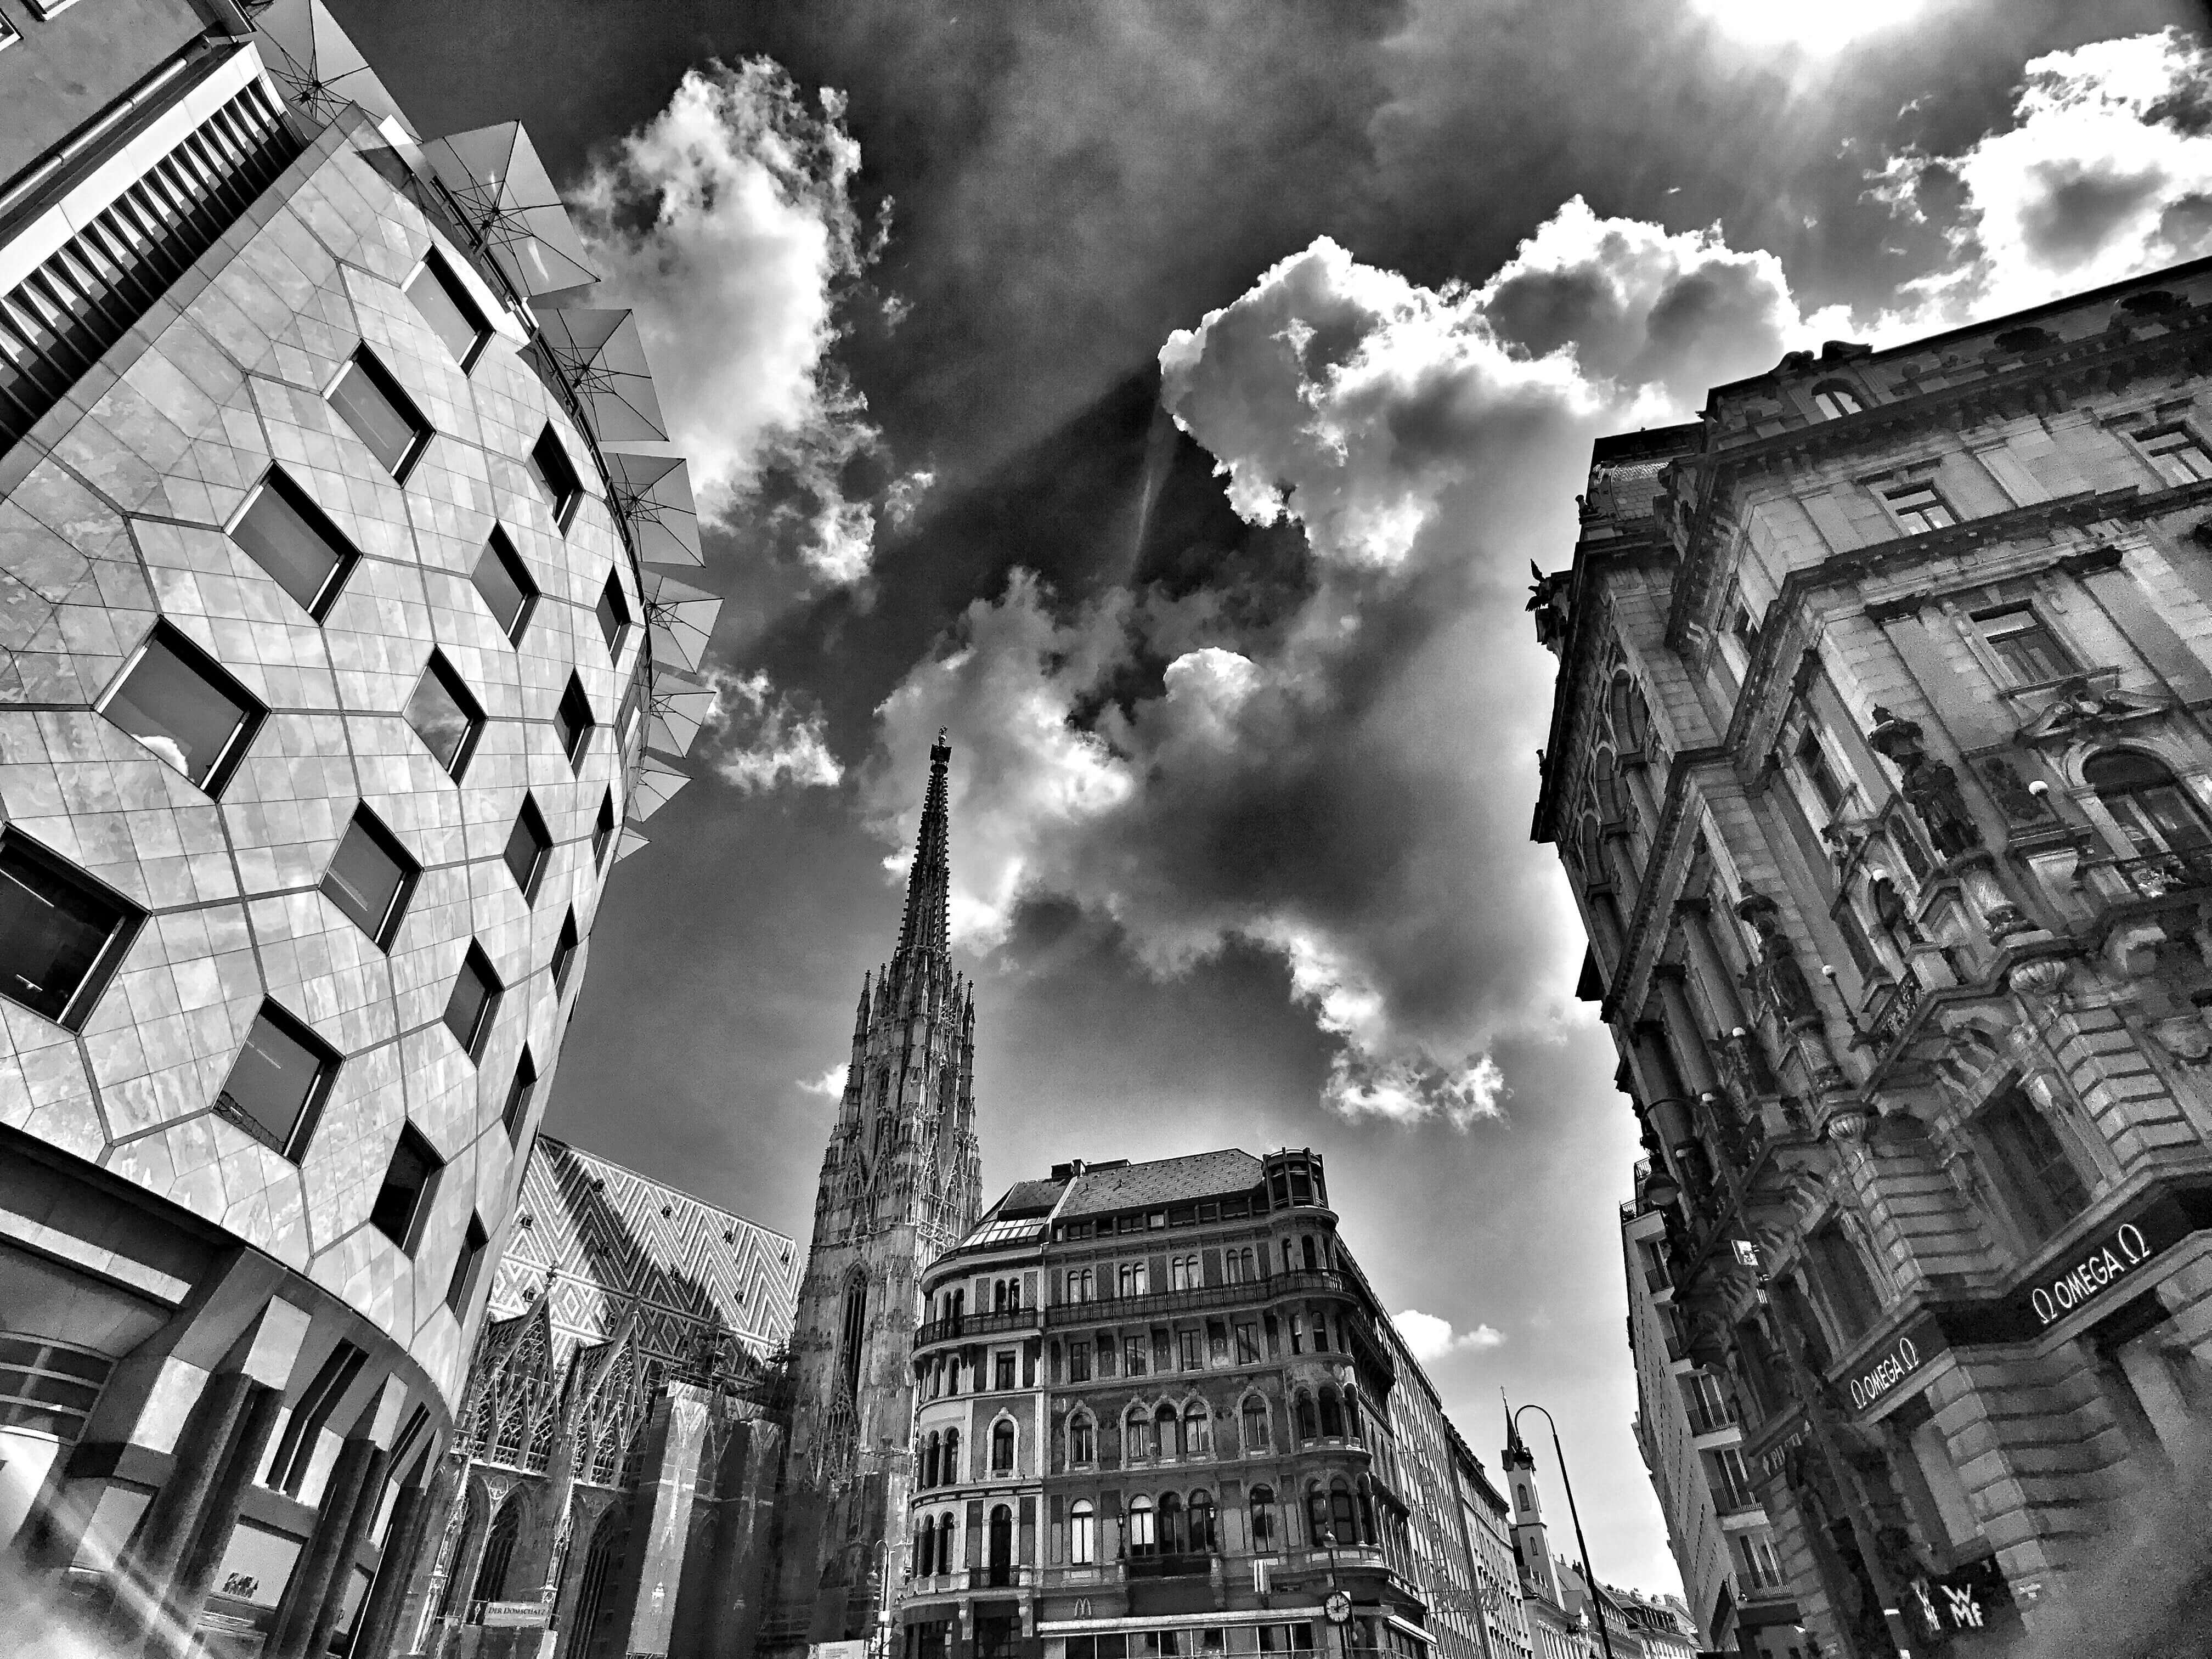 St. Stephen’s Cathedral in Vienna